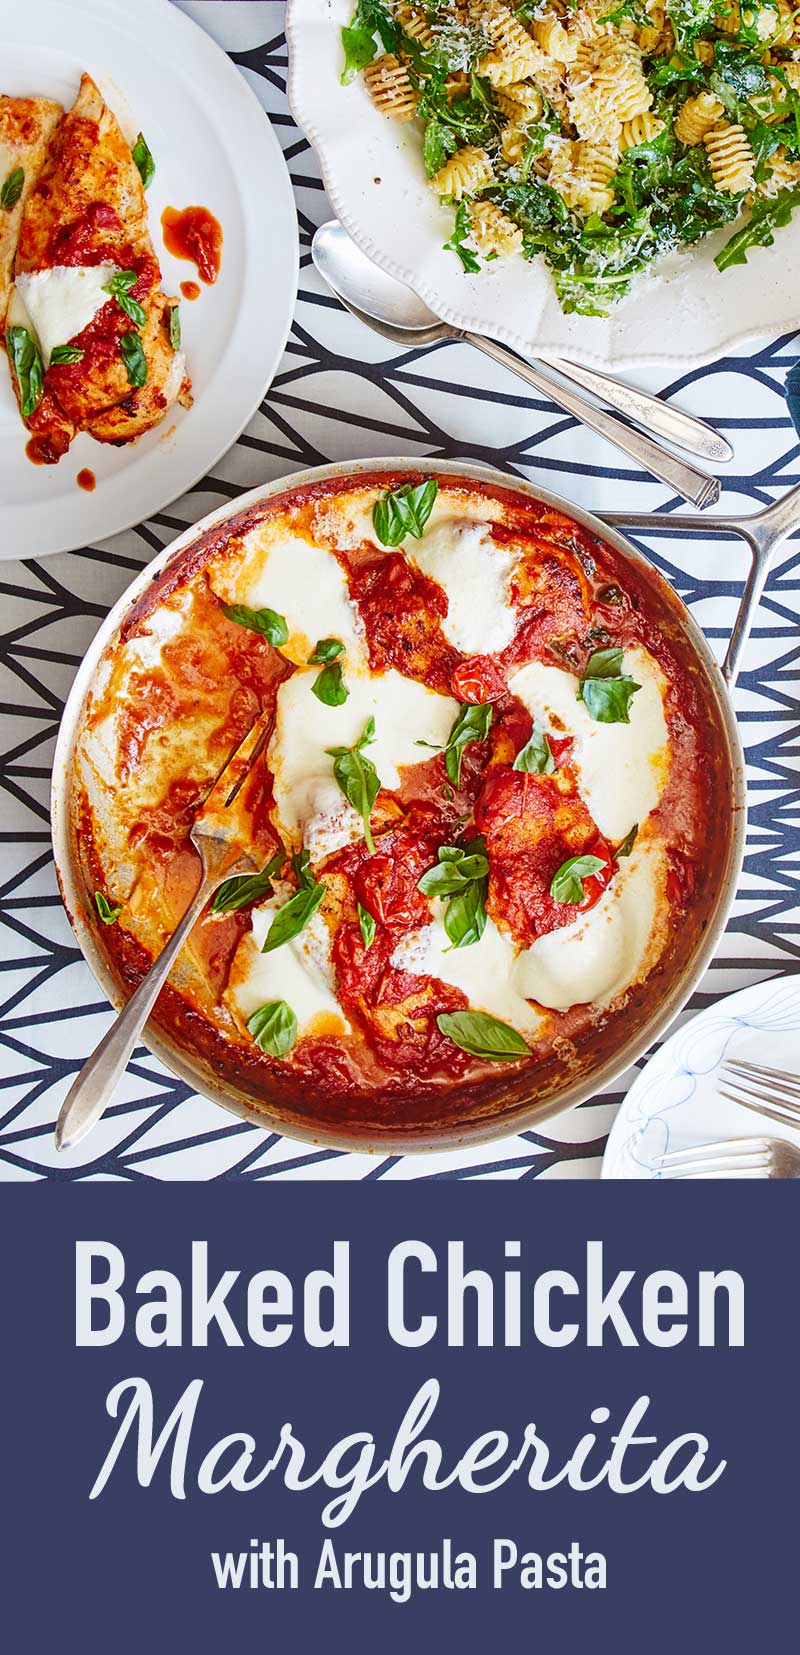 Looking for a great new chicken dinner recipe? You'll love this Baked Chicken Margherita Dinner: a wonderful spin on the classic Italian flavors of chicken, mozzarella, marinara sauce and fresh basil, all served over pasta with arugula. Wonderful new family recipe from Martha & Marley Spoon!